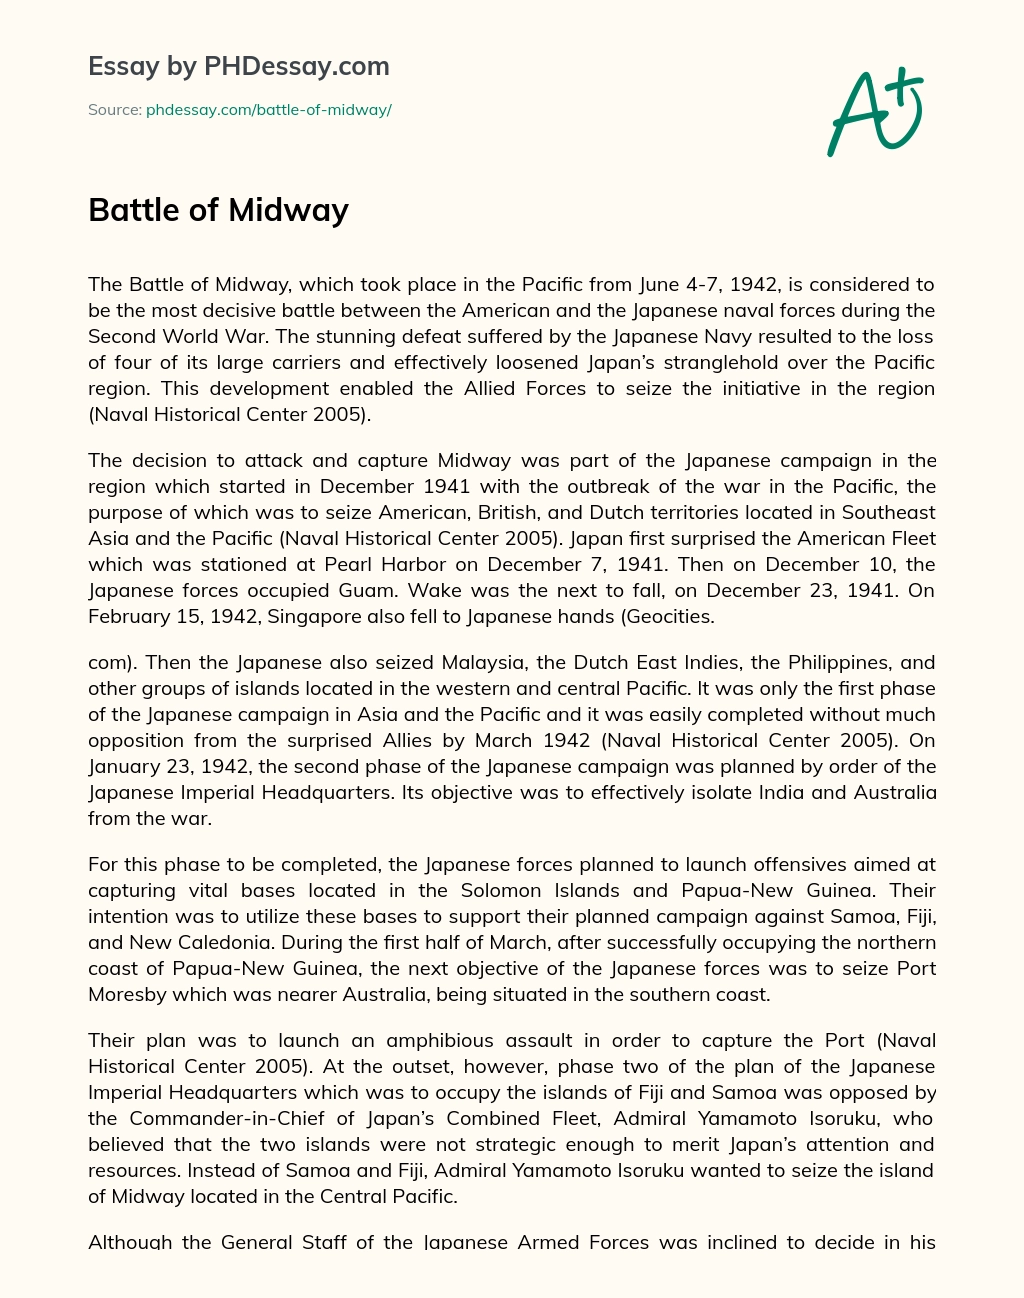 Battle of Midway essay